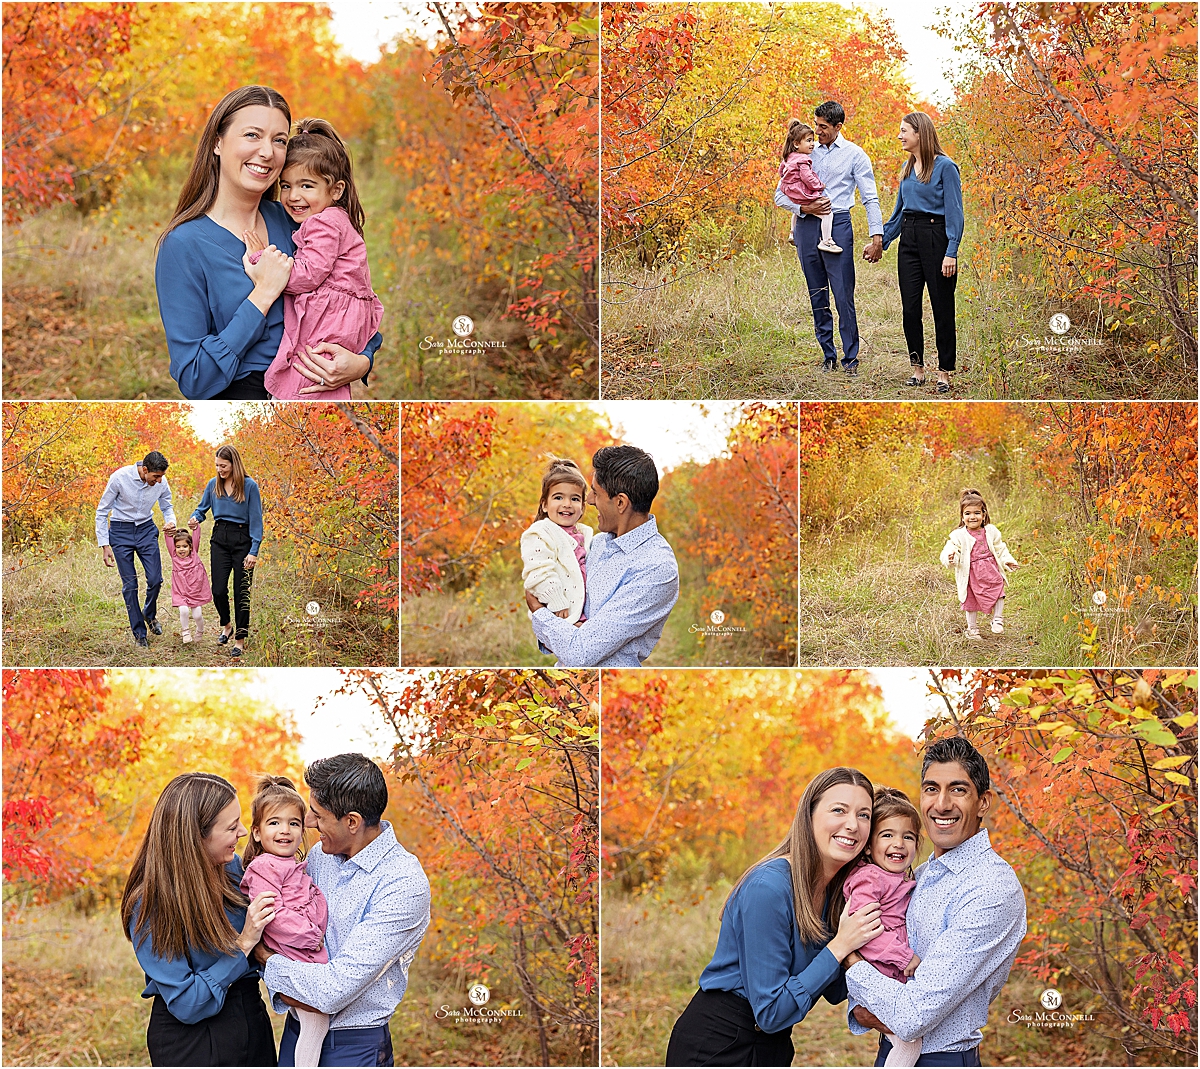 Orleans Family Photos During Fall